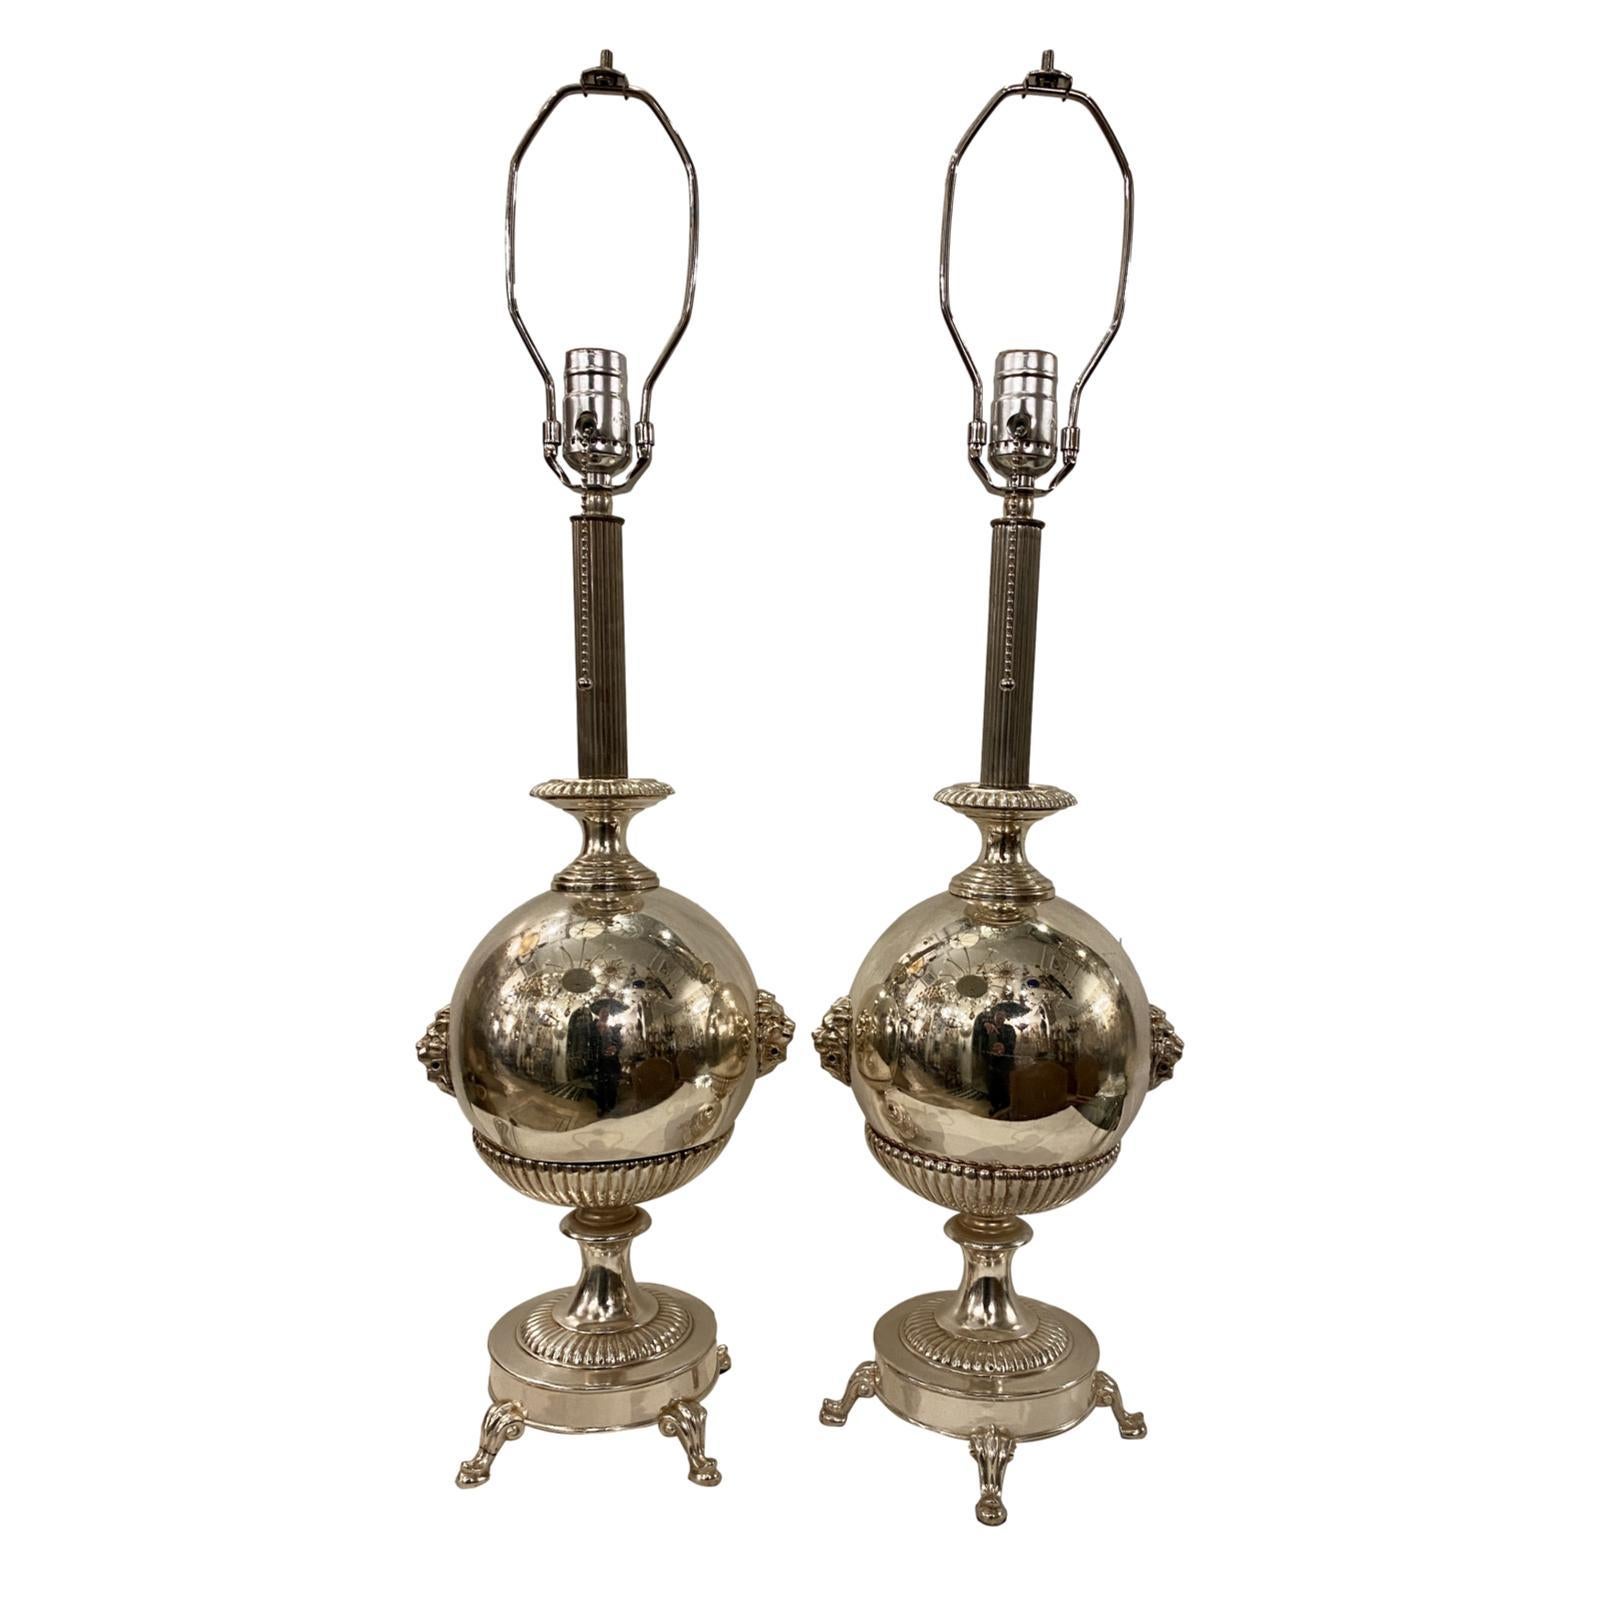 Pair of circa 1920's silver-plated neoclassic style lamps of neoclassic style, with lion's heads on body.

Measurements: 
Height of body: 20